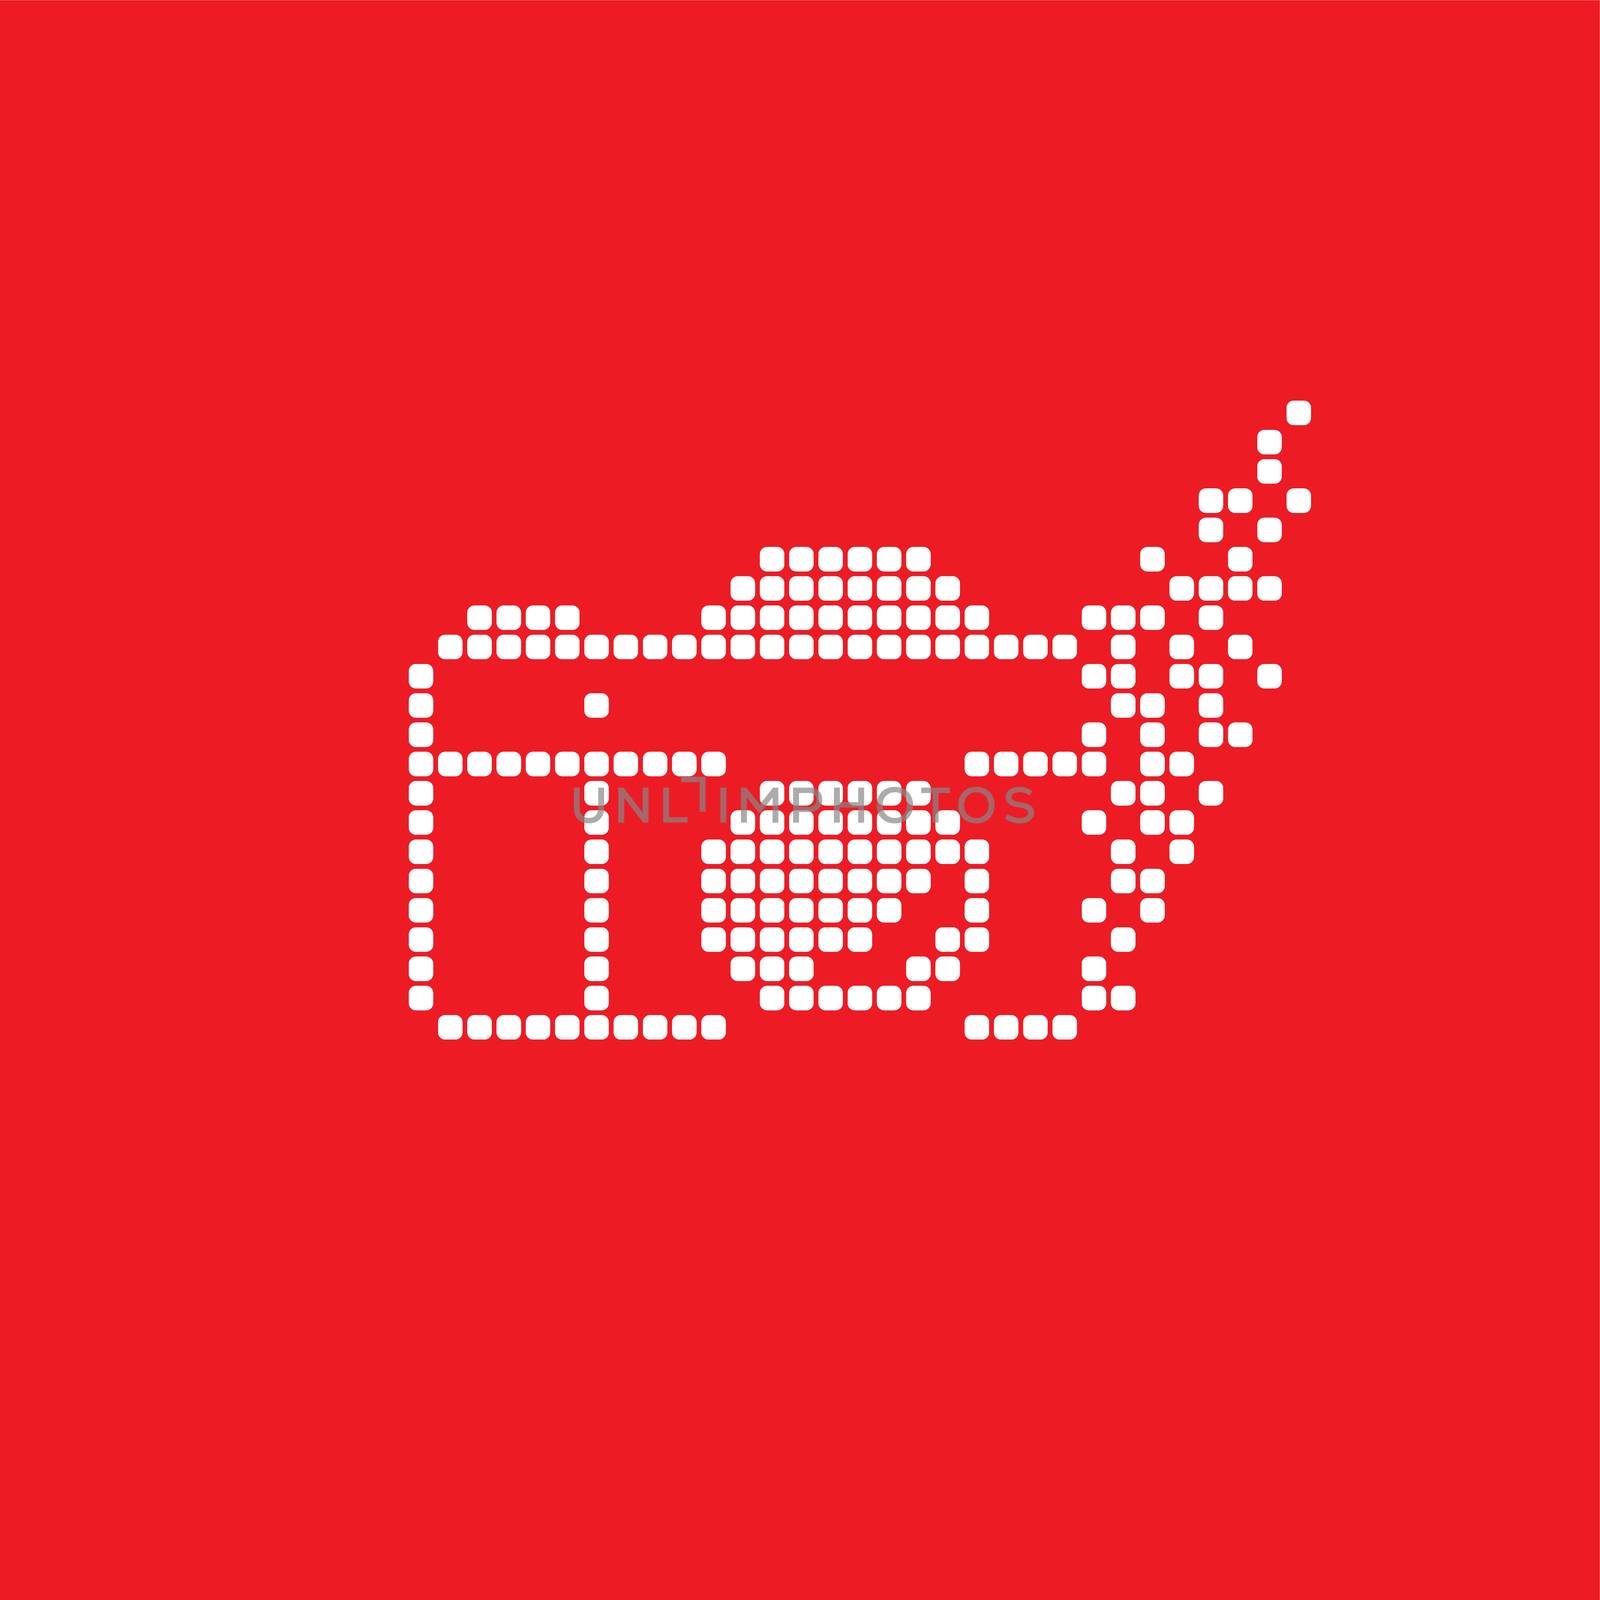 pixel photography theme logotype by vector1st